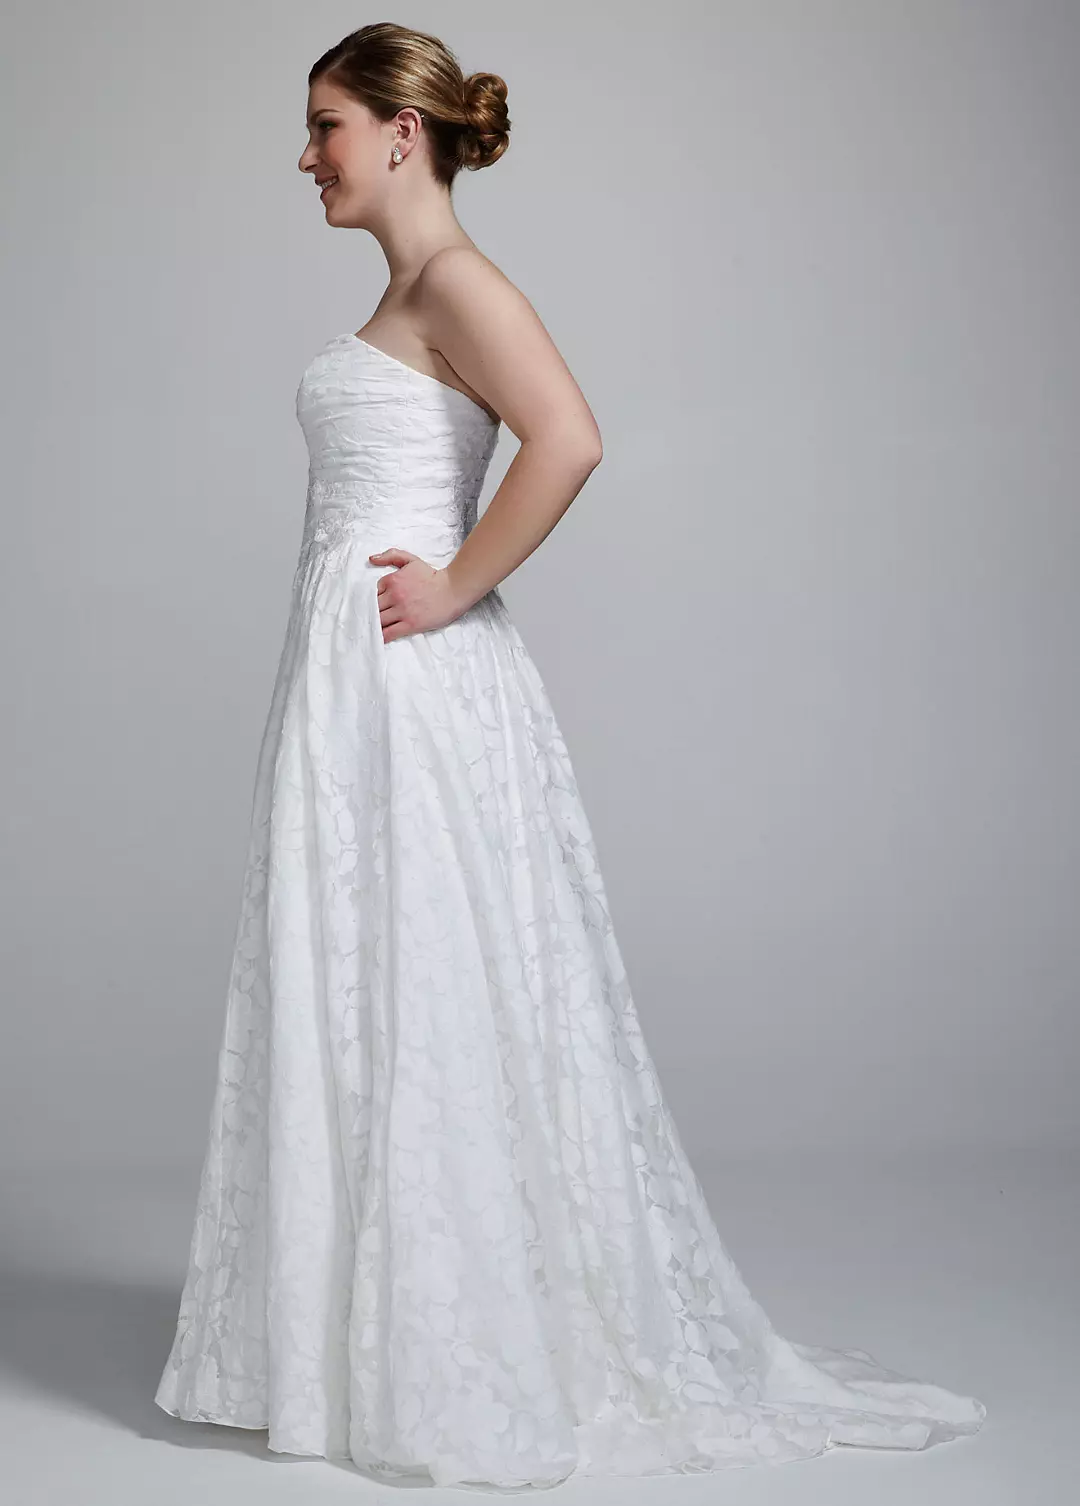 Lace Ball Gown with Intricate Embroidered Details Image 3